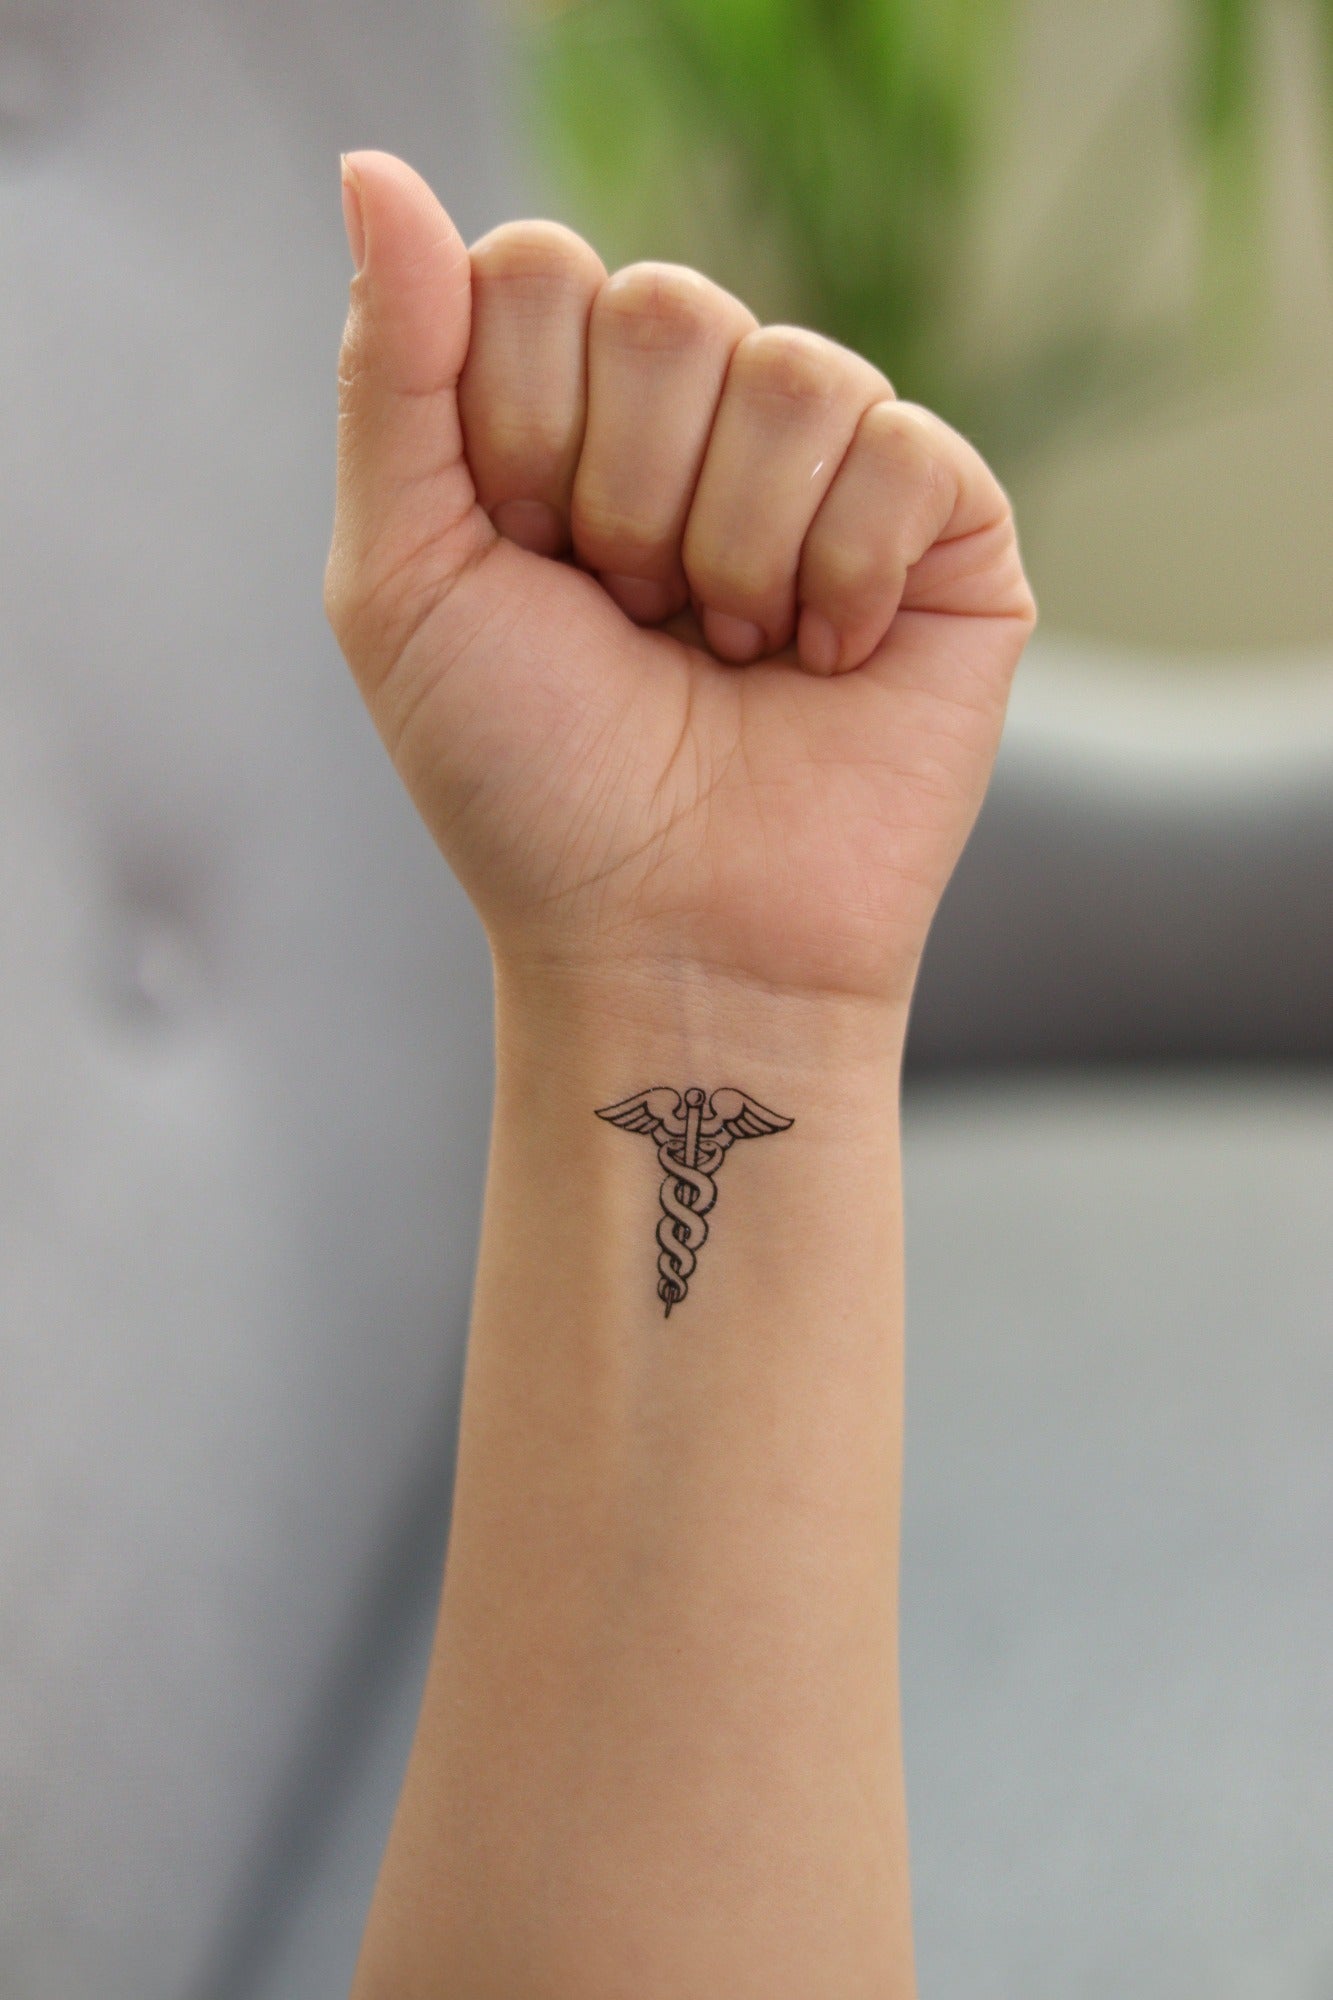 Easy Removable Medical Tattoos